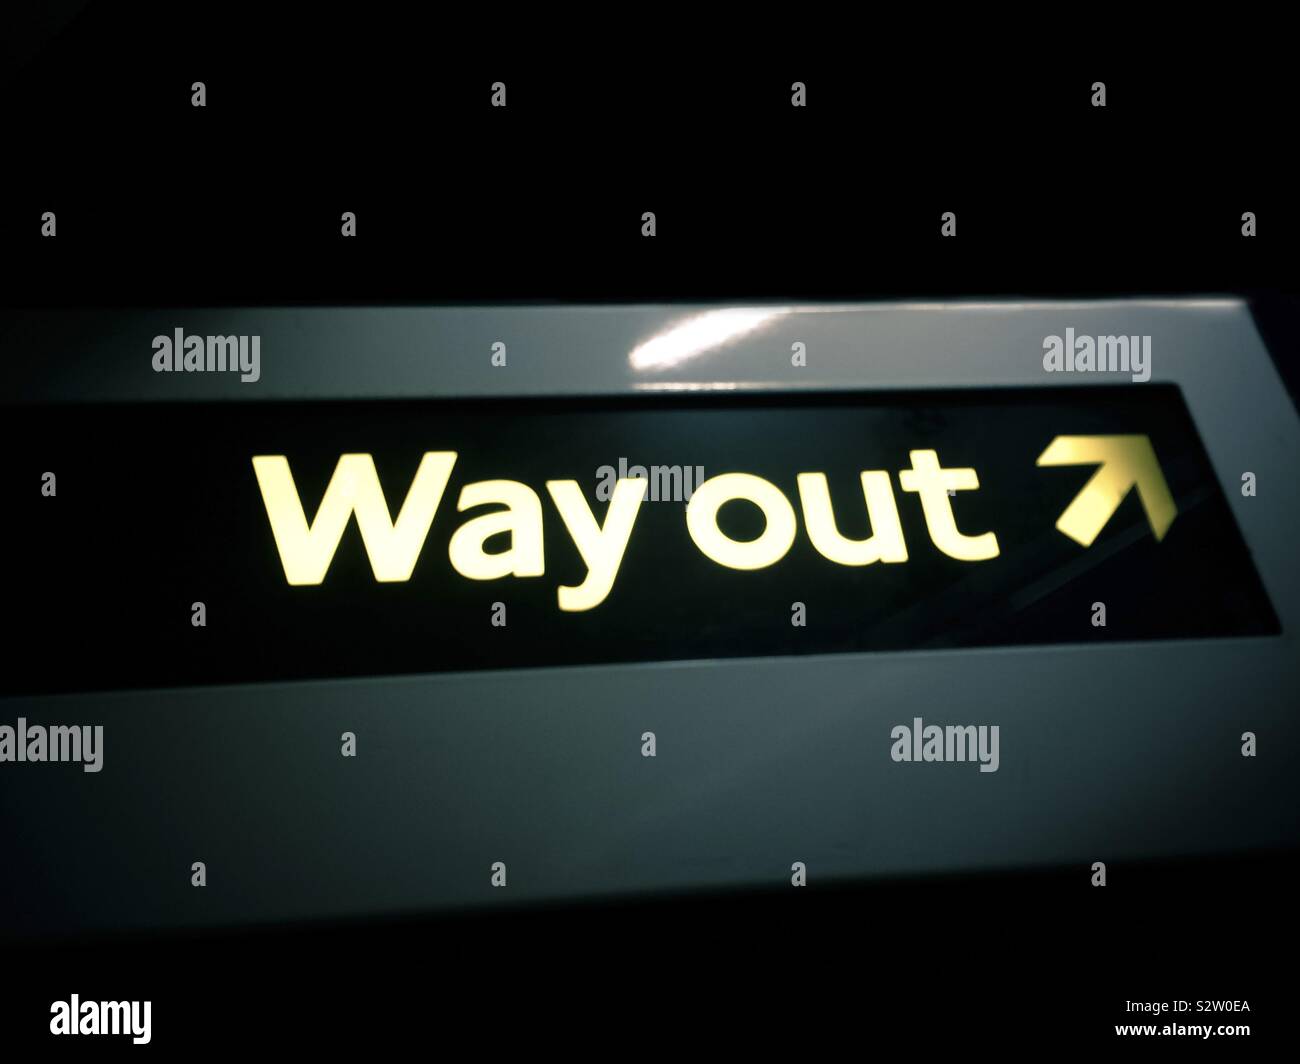 Way Out symbol from a subway in London, UK Stock Photo